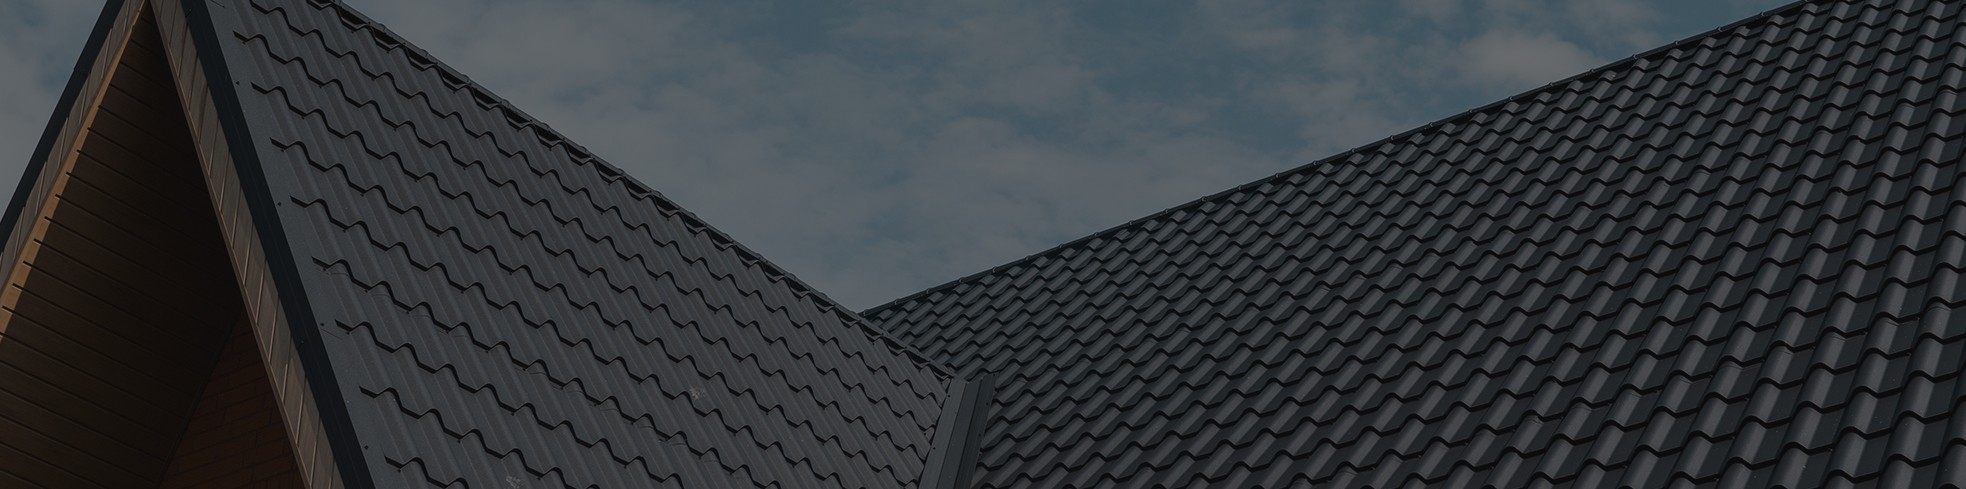 Jerkinhead roofing services in Milwaukee, WI 